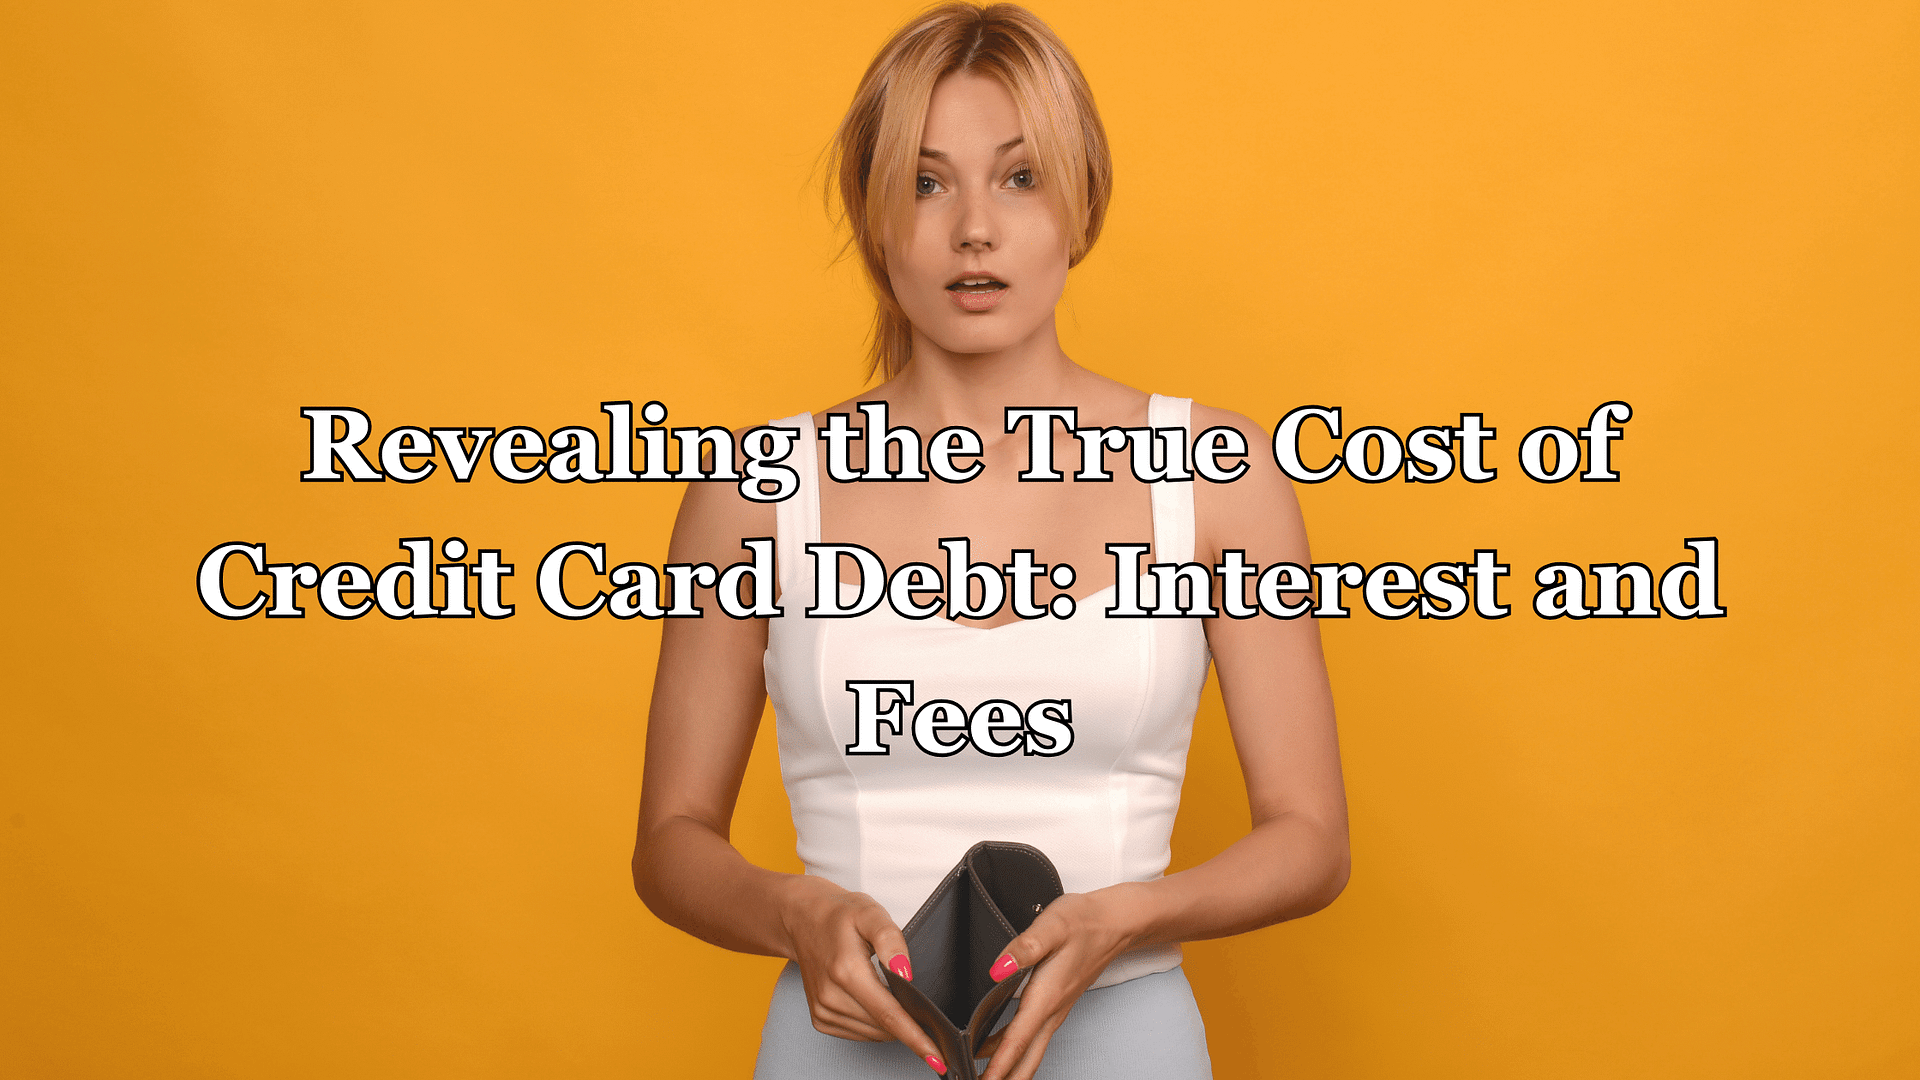 Revealing the True Cost of Credit Card Debt: Interest and Fees